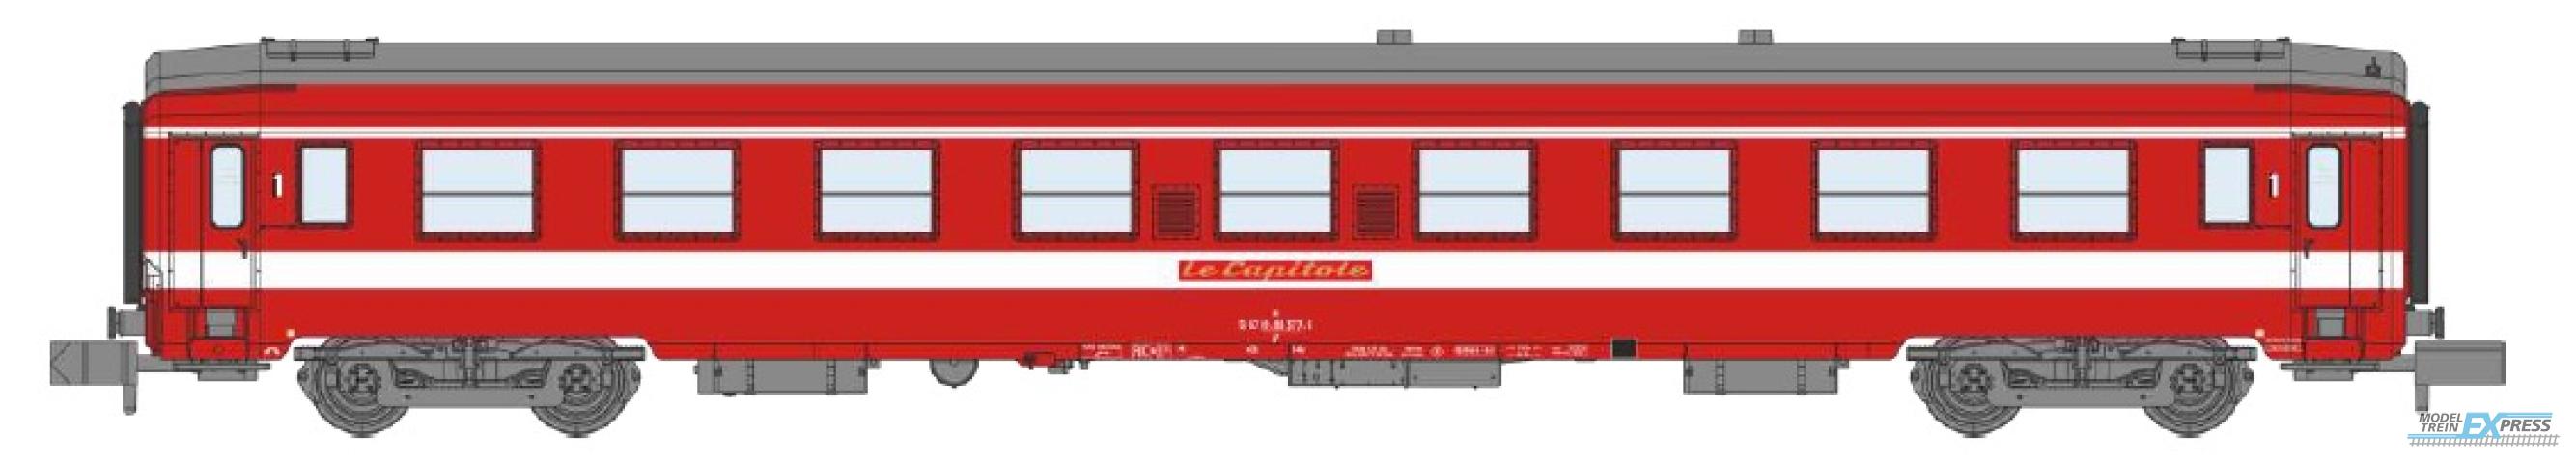 REE models NW-158 UIC Car A9 Era IV Red "LE CAPITOLE"